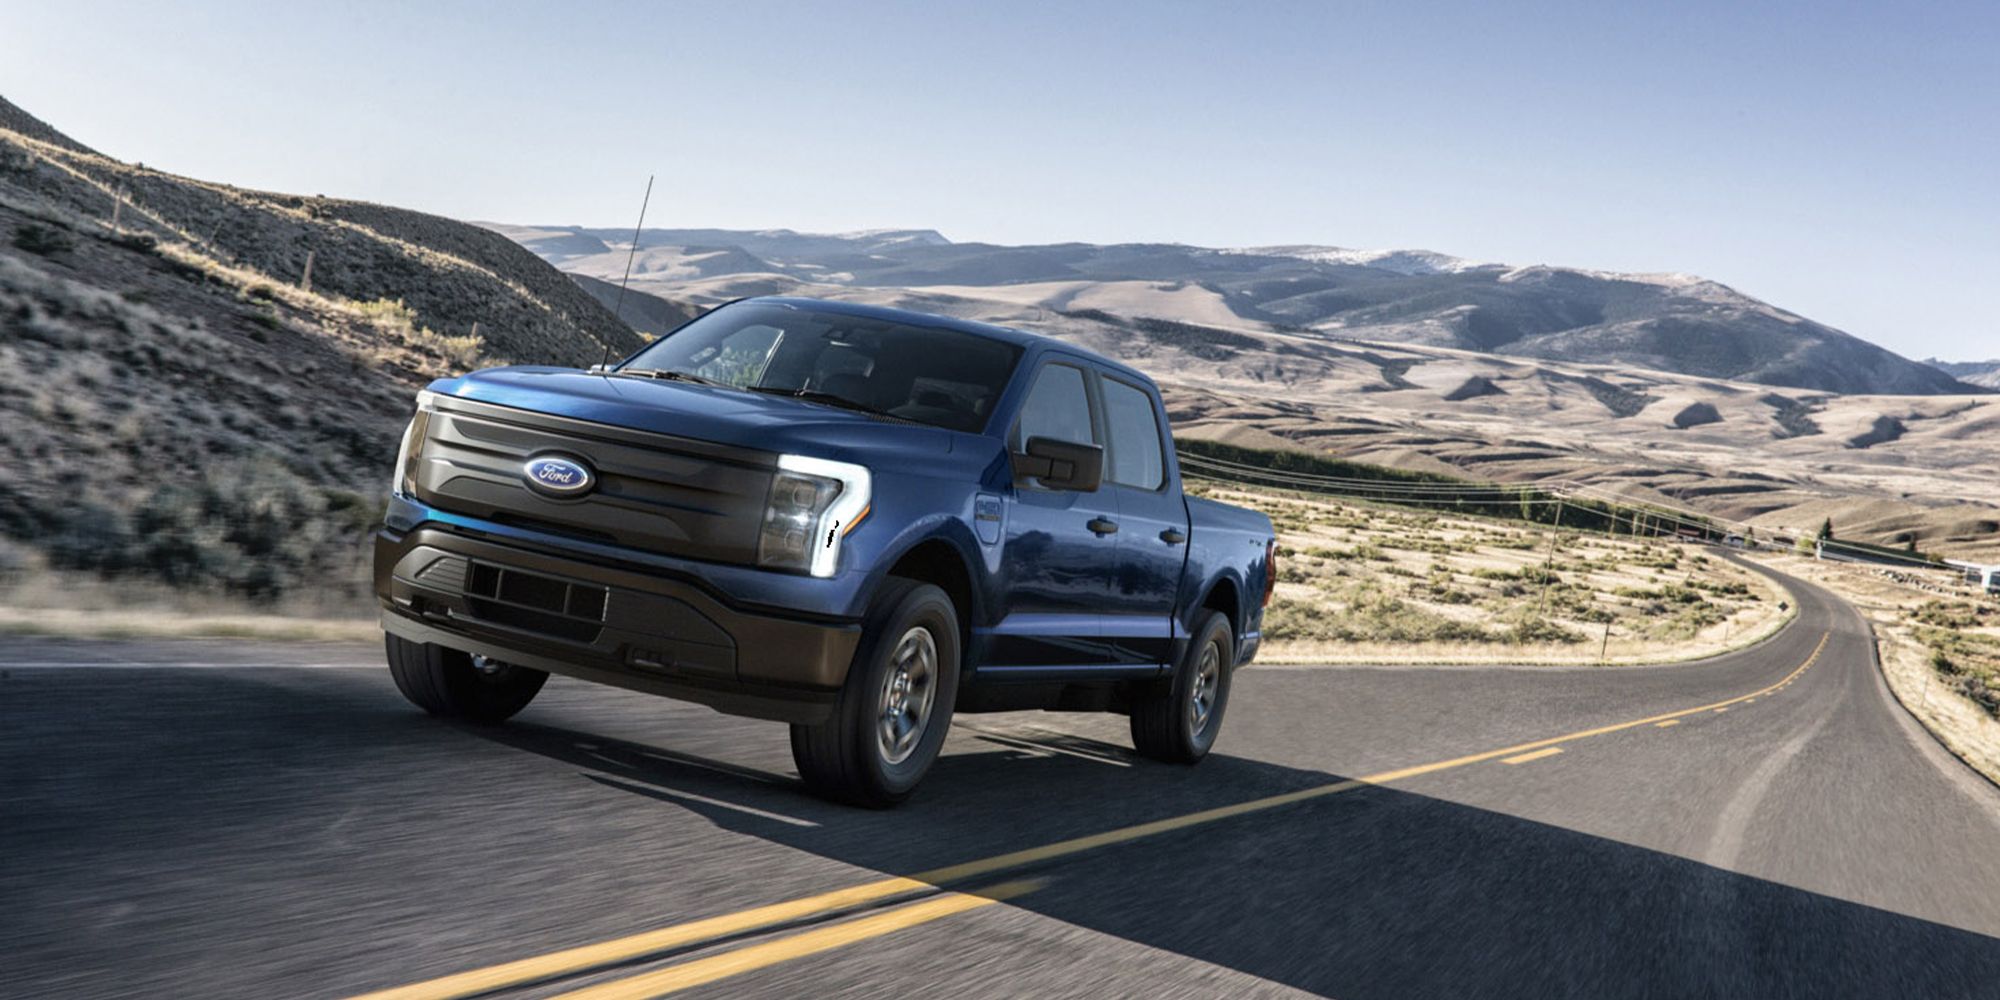 The F-150 Lightning Pro on the move